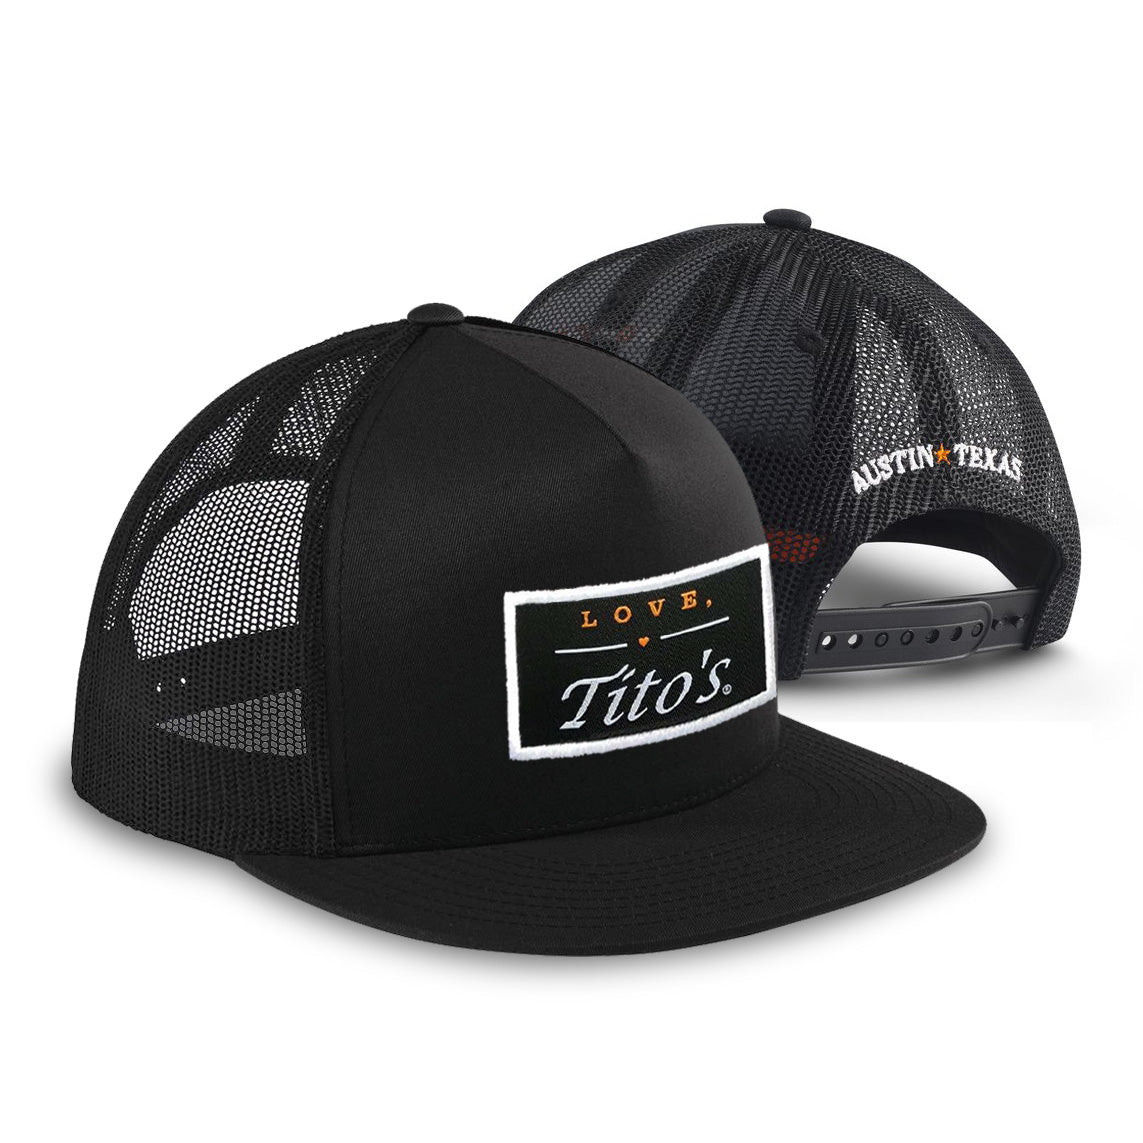 Black trucker hat with "Love, Tito's" logo patch on front and "Austin, Texas" embroidered on back